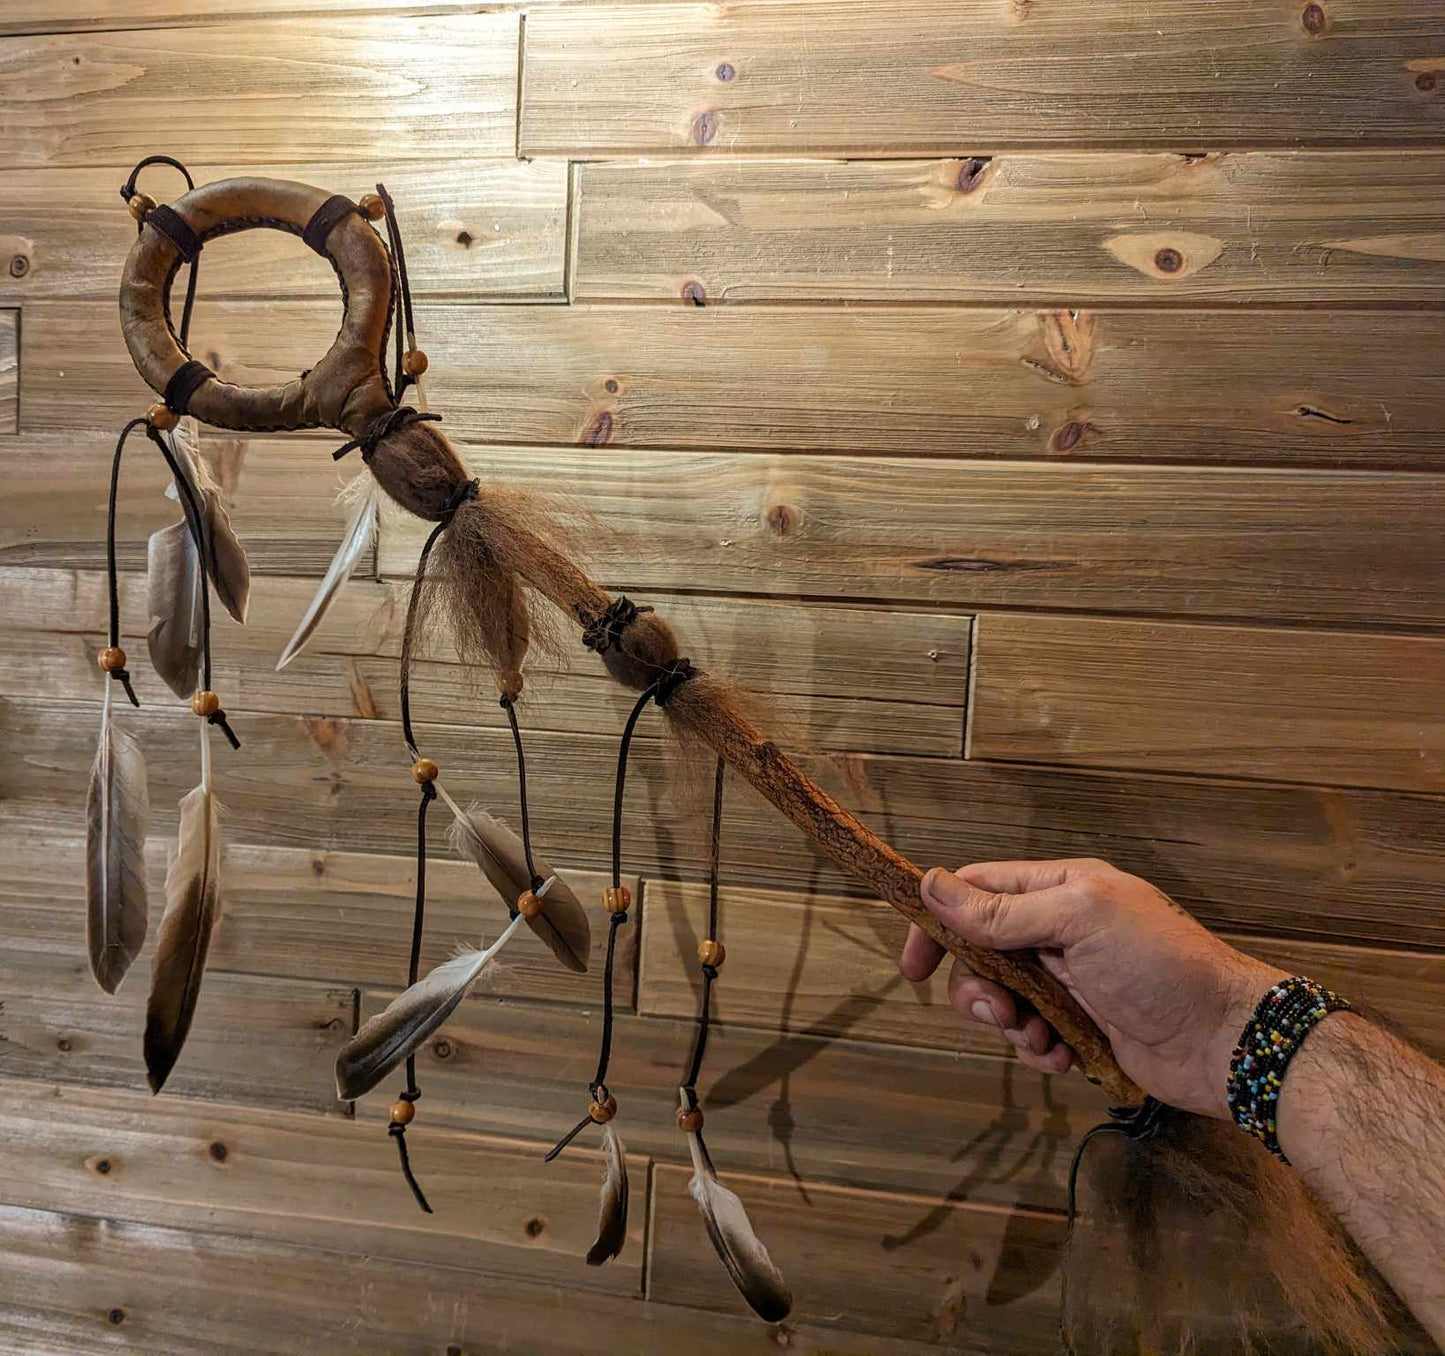 Bison Hide Loop Shaman Rattle Hand Crafted from Birch Wood Duck Feathers and Buffalo Hide | Meditation Rattle | Sound Healing